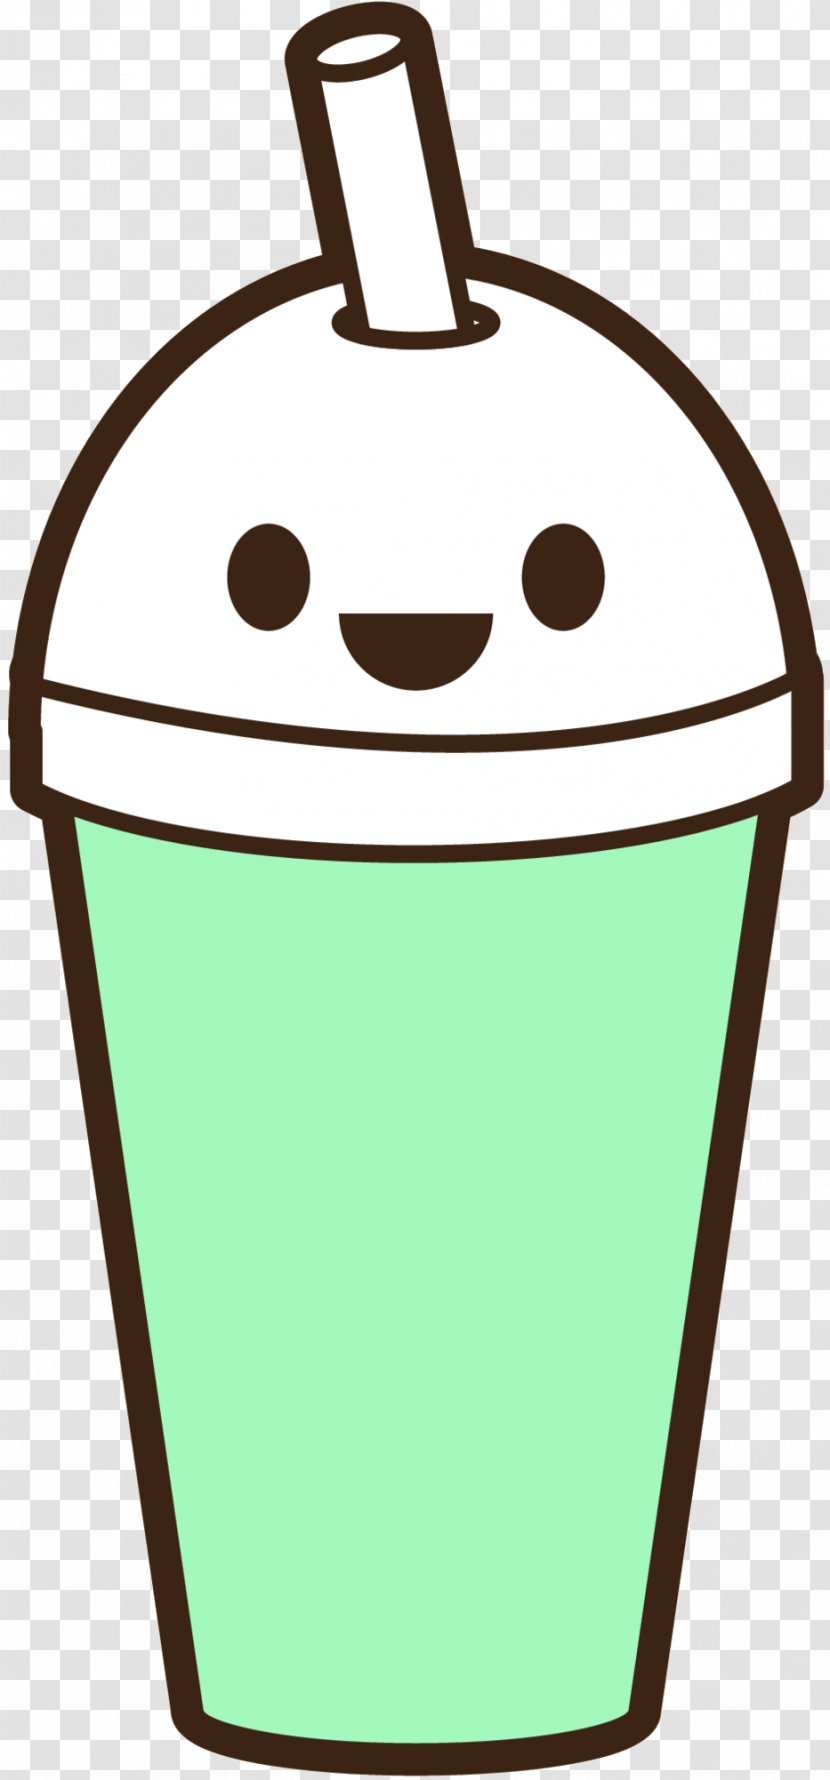 Coffee Cup Drink Cartoon - Household Supply - Mug Transparent PNG